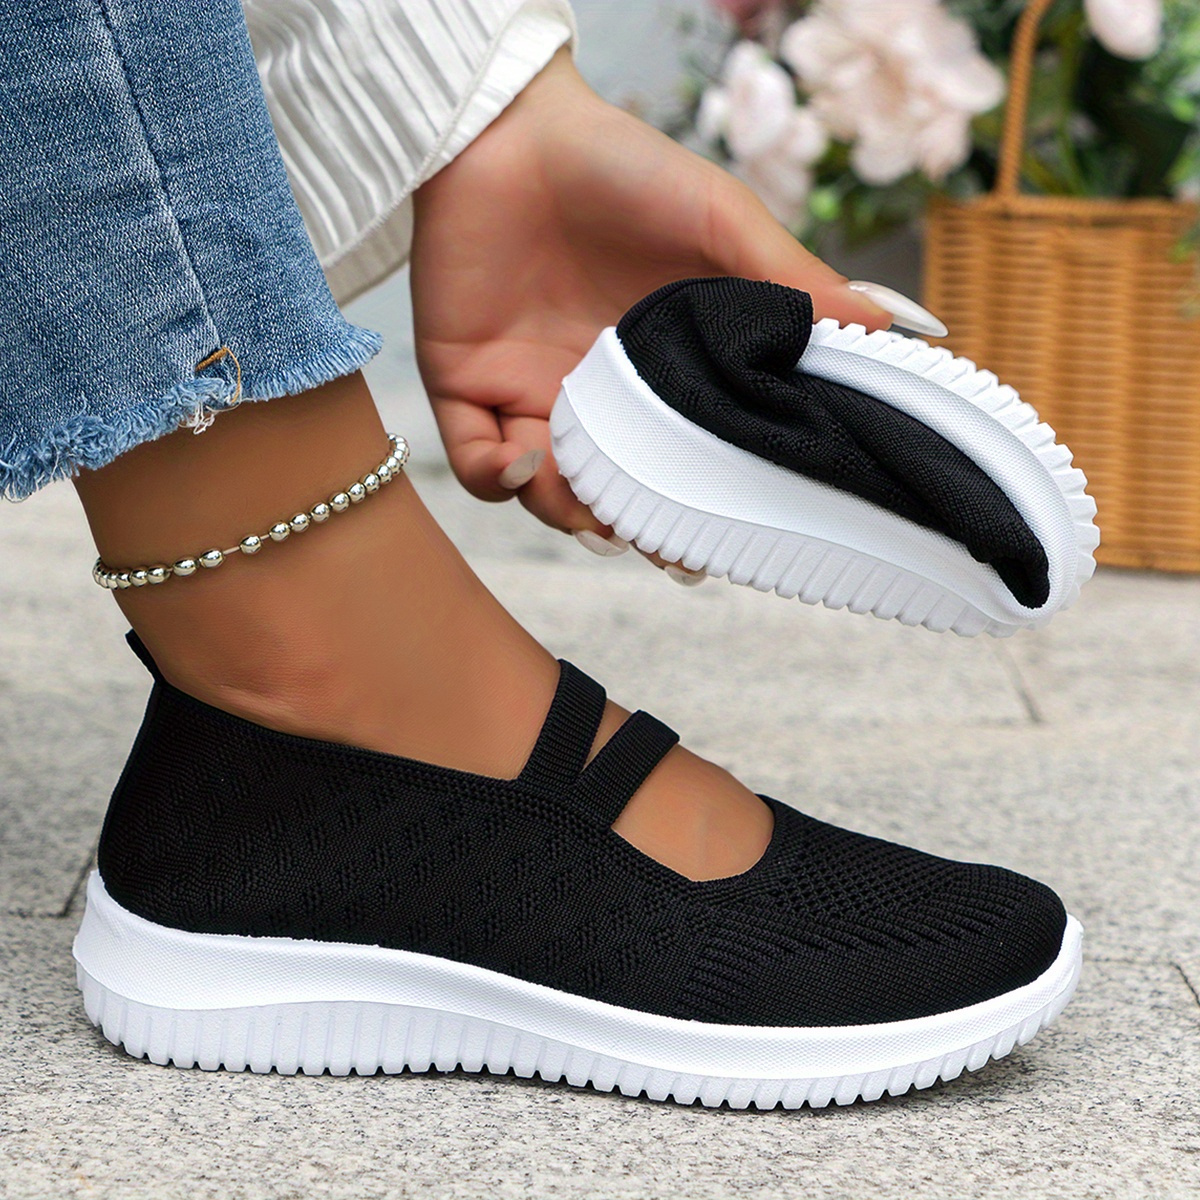 

Women's Summer Casual Sneakers, Breathable Mesh Flats, Comfy Slip-on Loafers, Ladies Walking Shoes